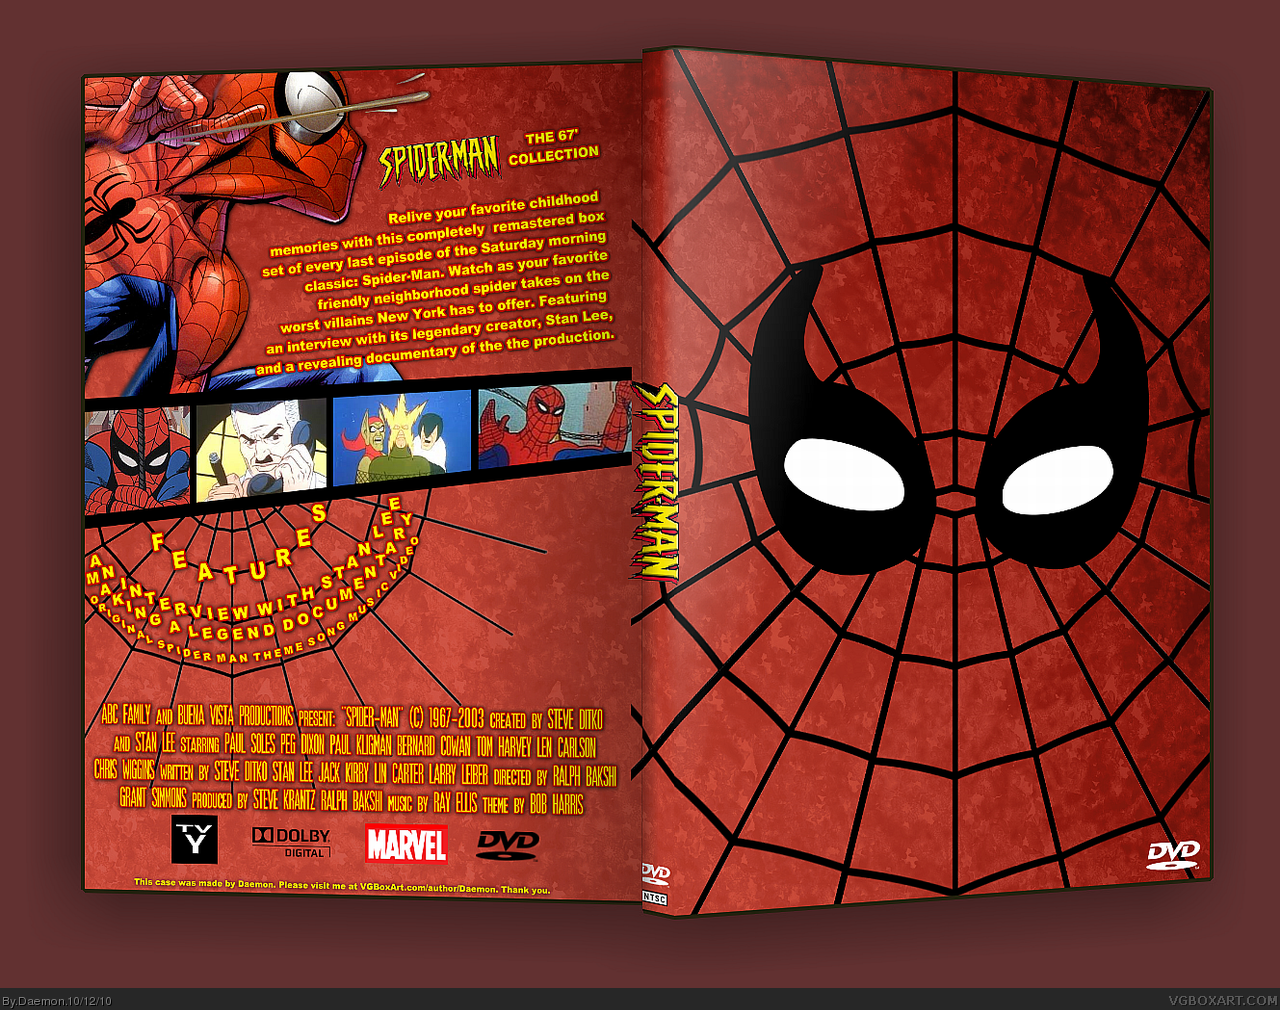 Spider-Man: The 67' Collection box cover